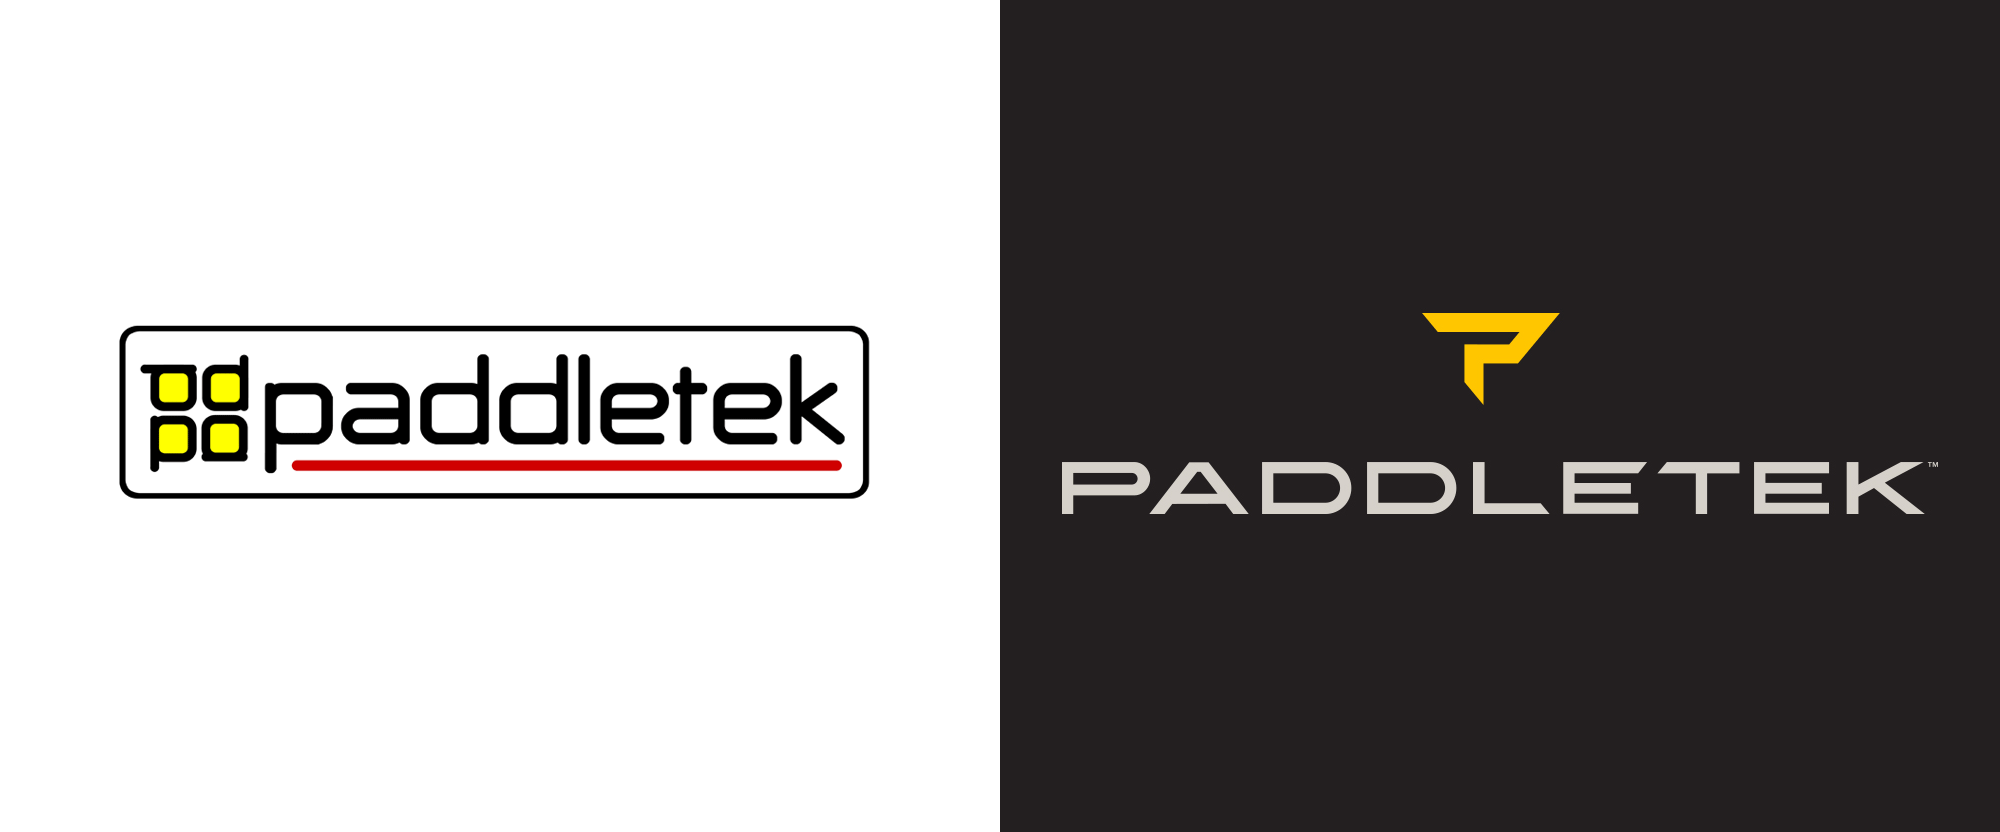 New Logo, Identity, and Packaging for Paddletek by Young & Laramore